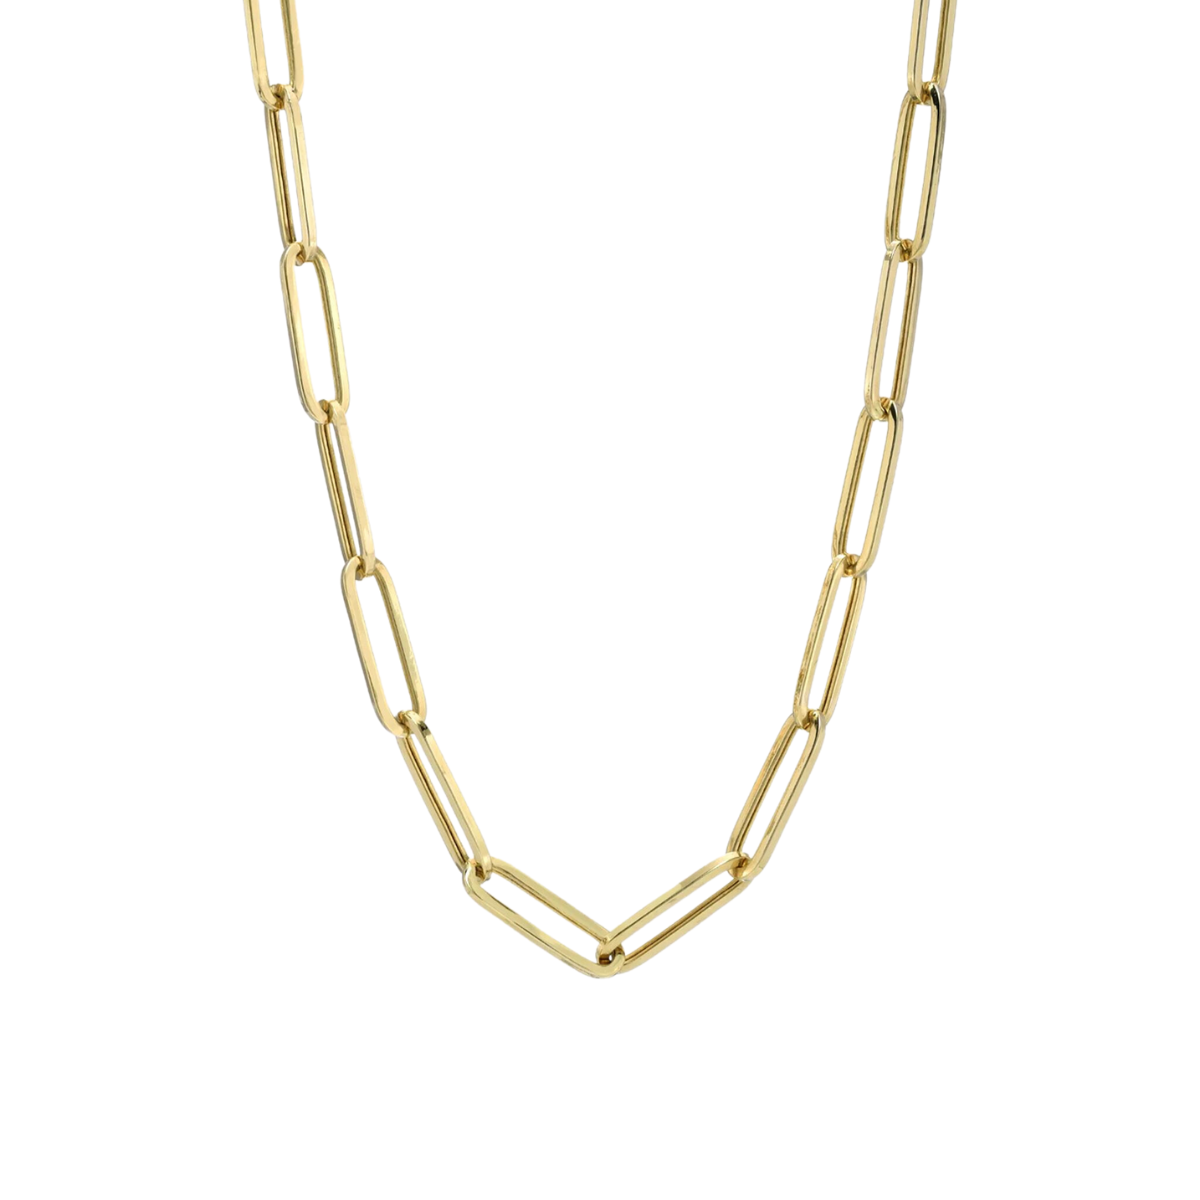 Italian 10k Yellow Gold 20" 4MM Paperclip Chain Necklace 5 gm